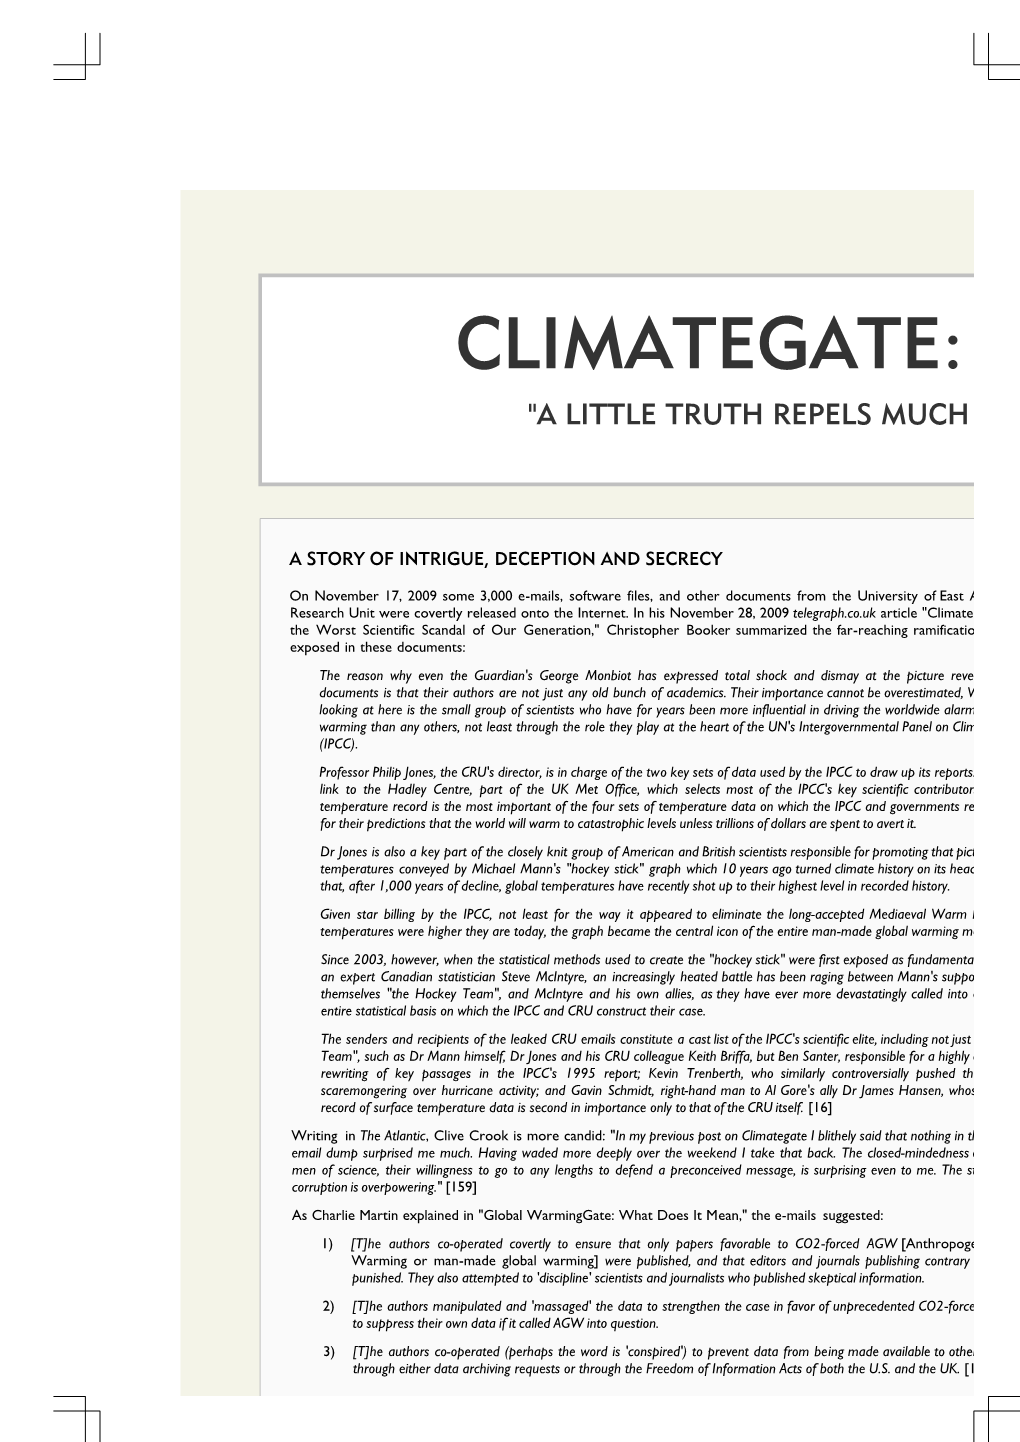 Climategate: "A Little Truth Repels Much